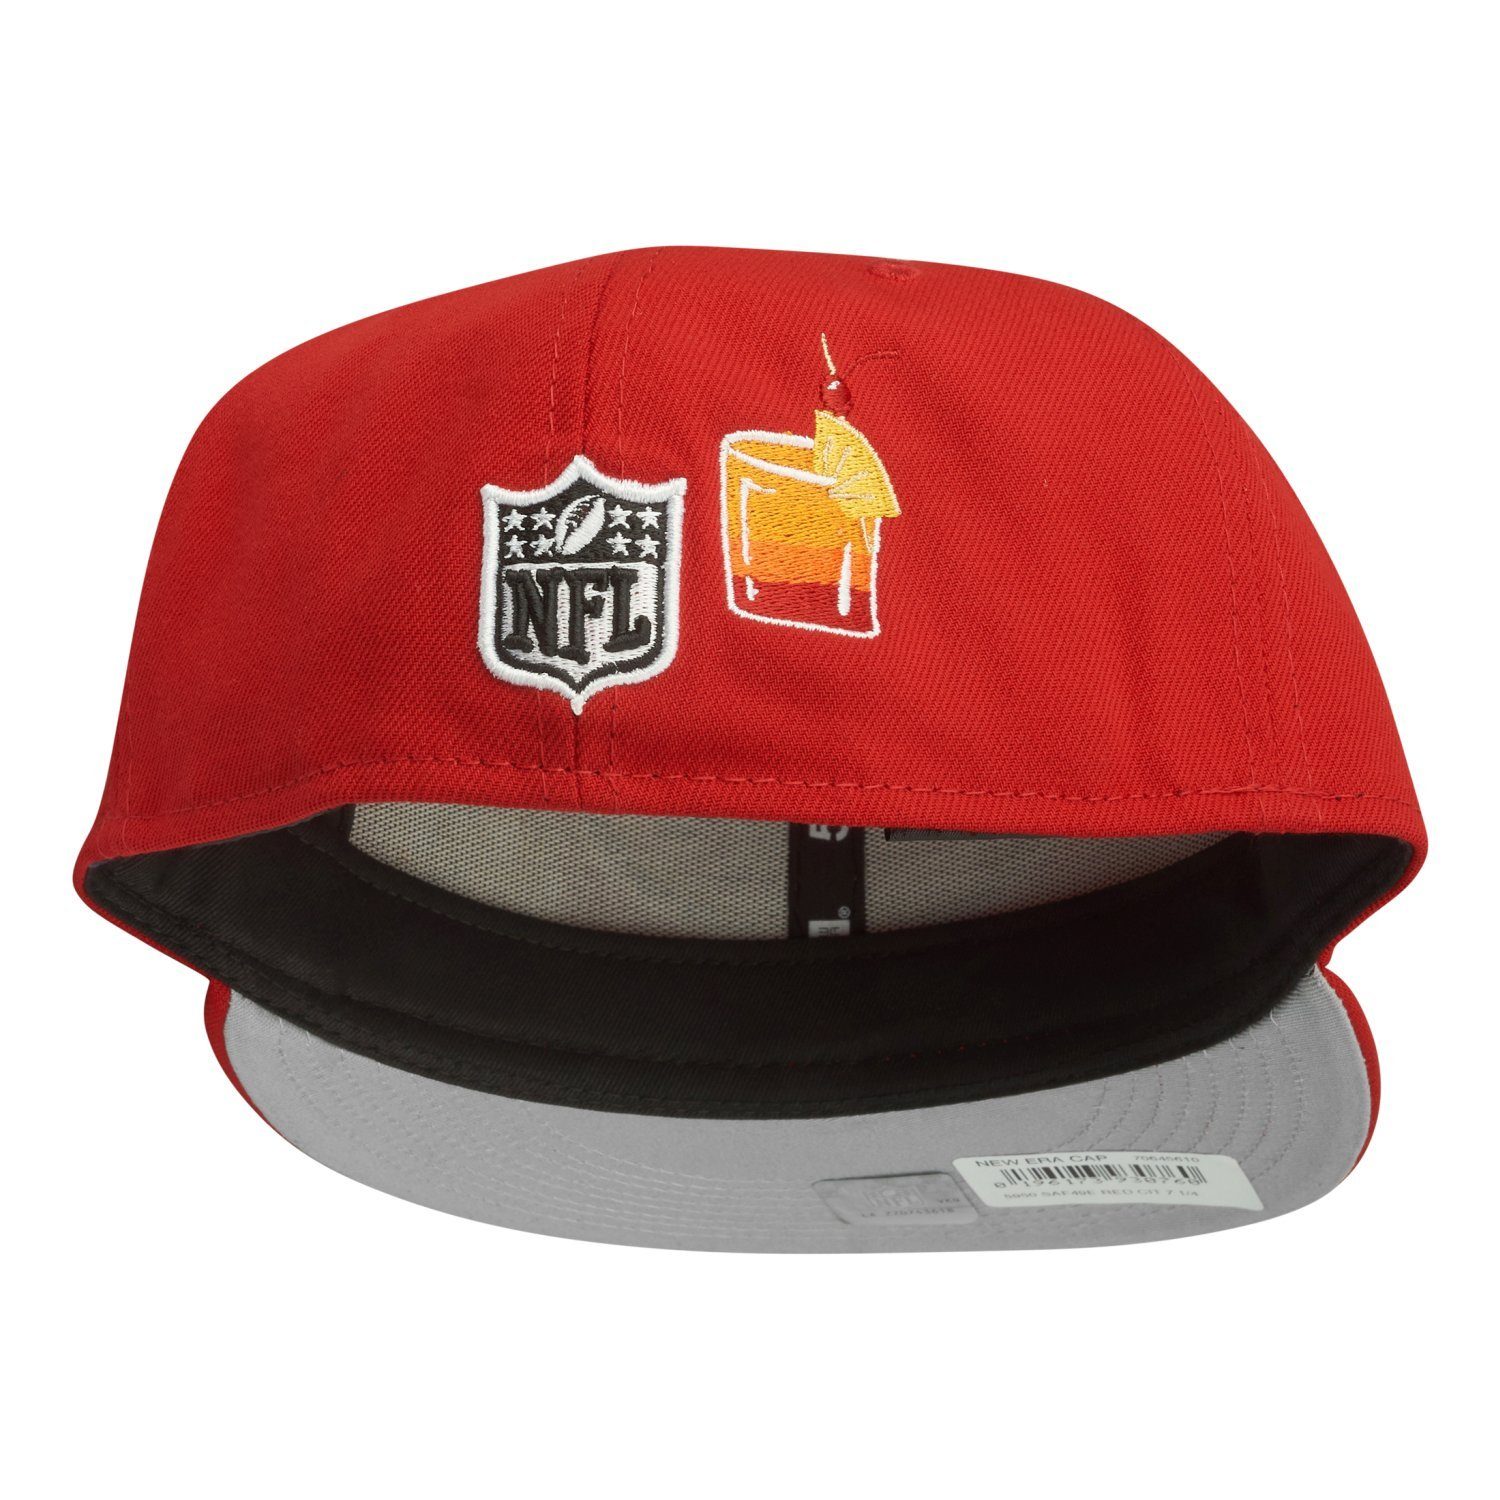 CITY 49ers Francisco Era 59Fifty Cap New San NFL Fitted